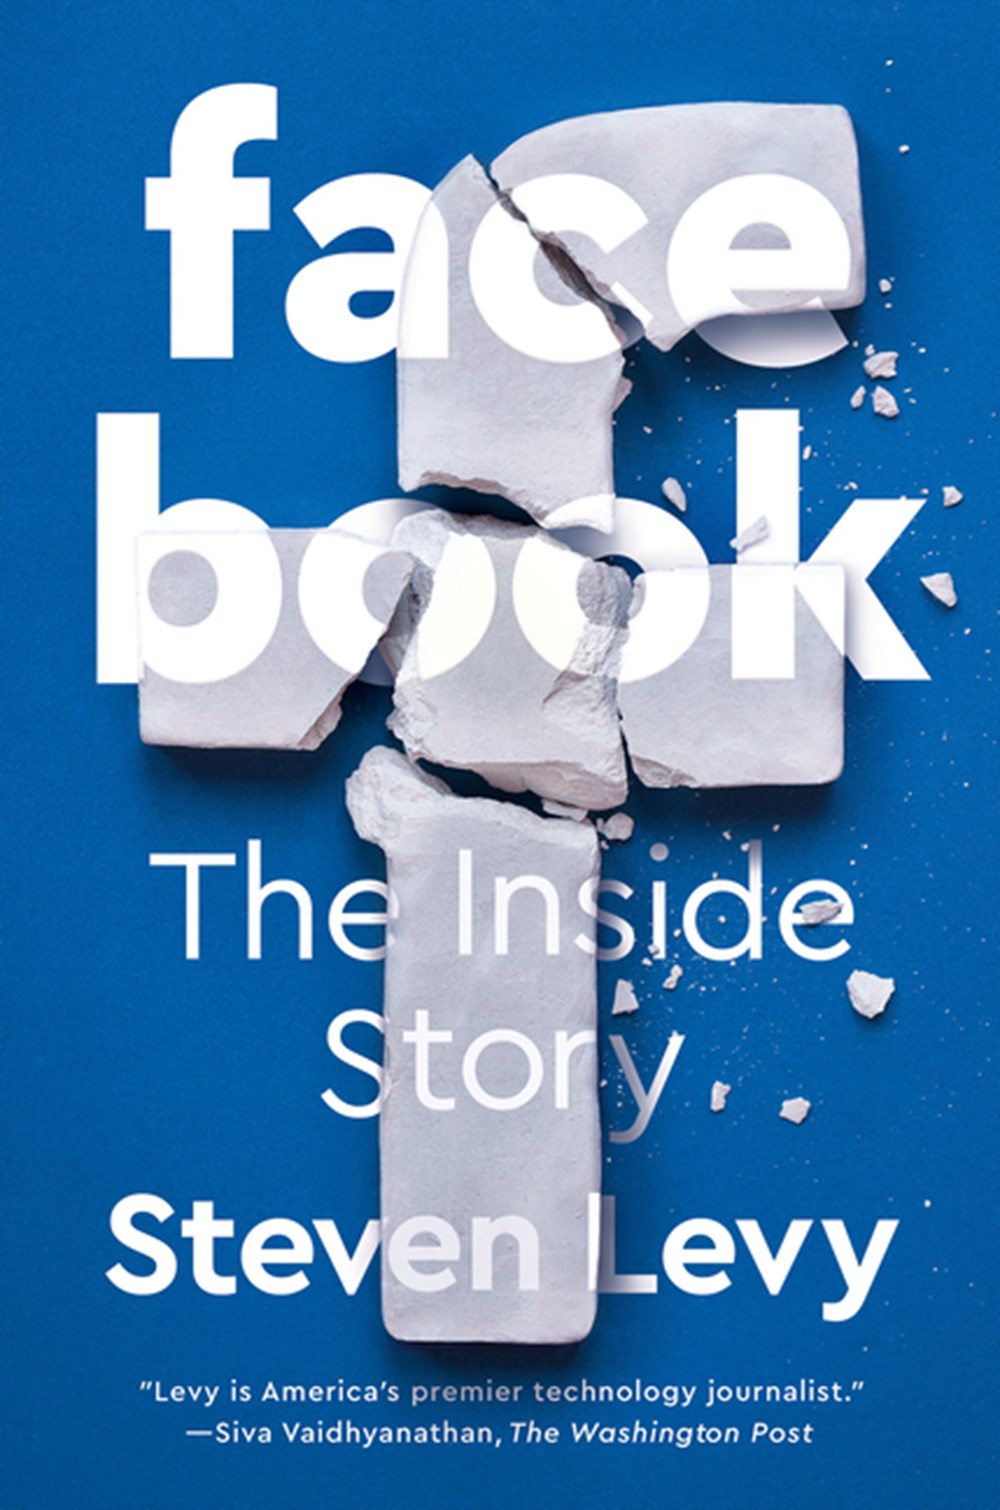 Facebook The Inside Story